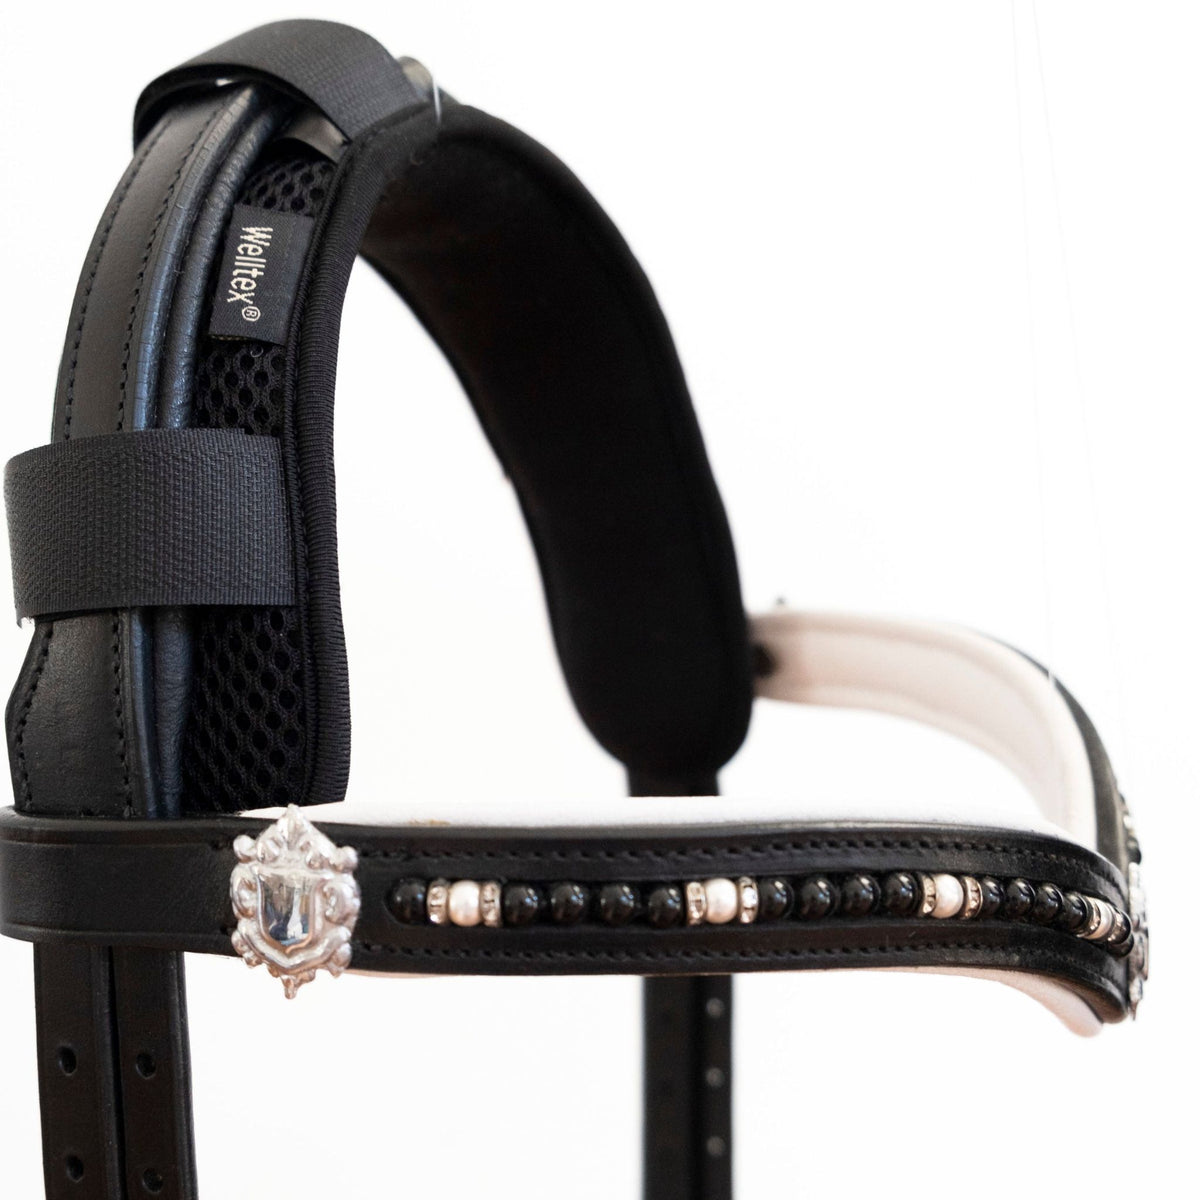 Black poll cover attached to the crownpiece of a bridle. 